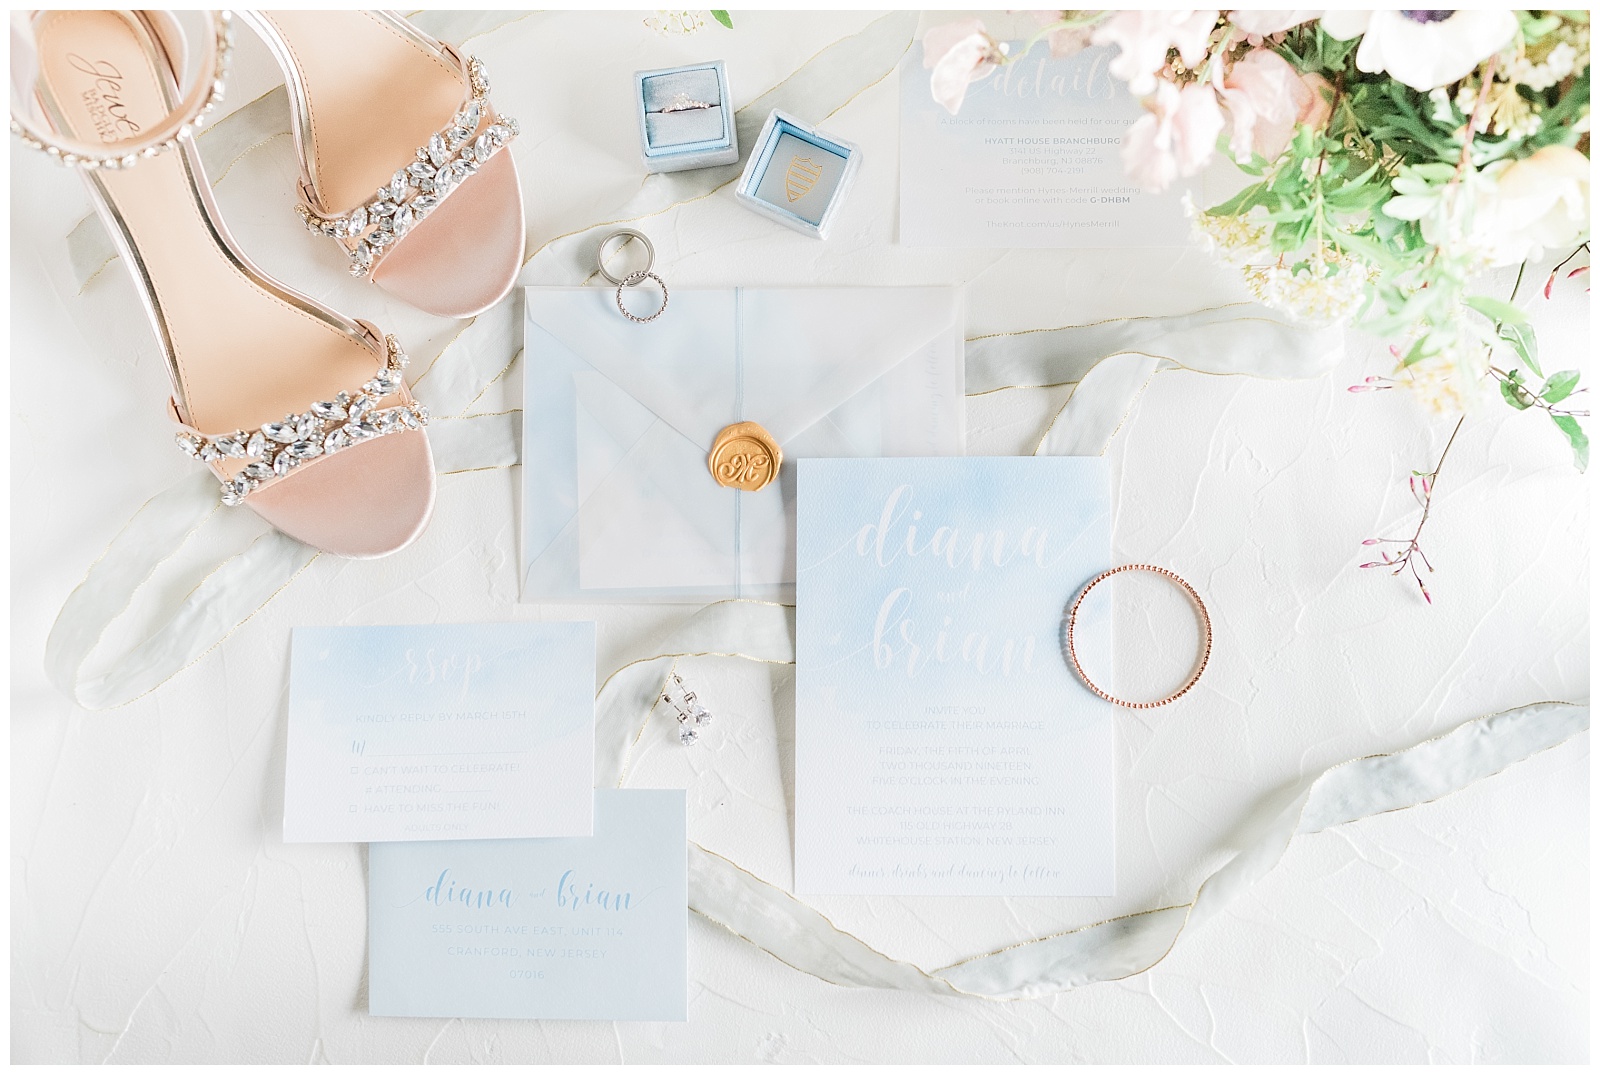 A blue watercolor invitation suite styled with Badgley Mischka shoes and wedding rings.